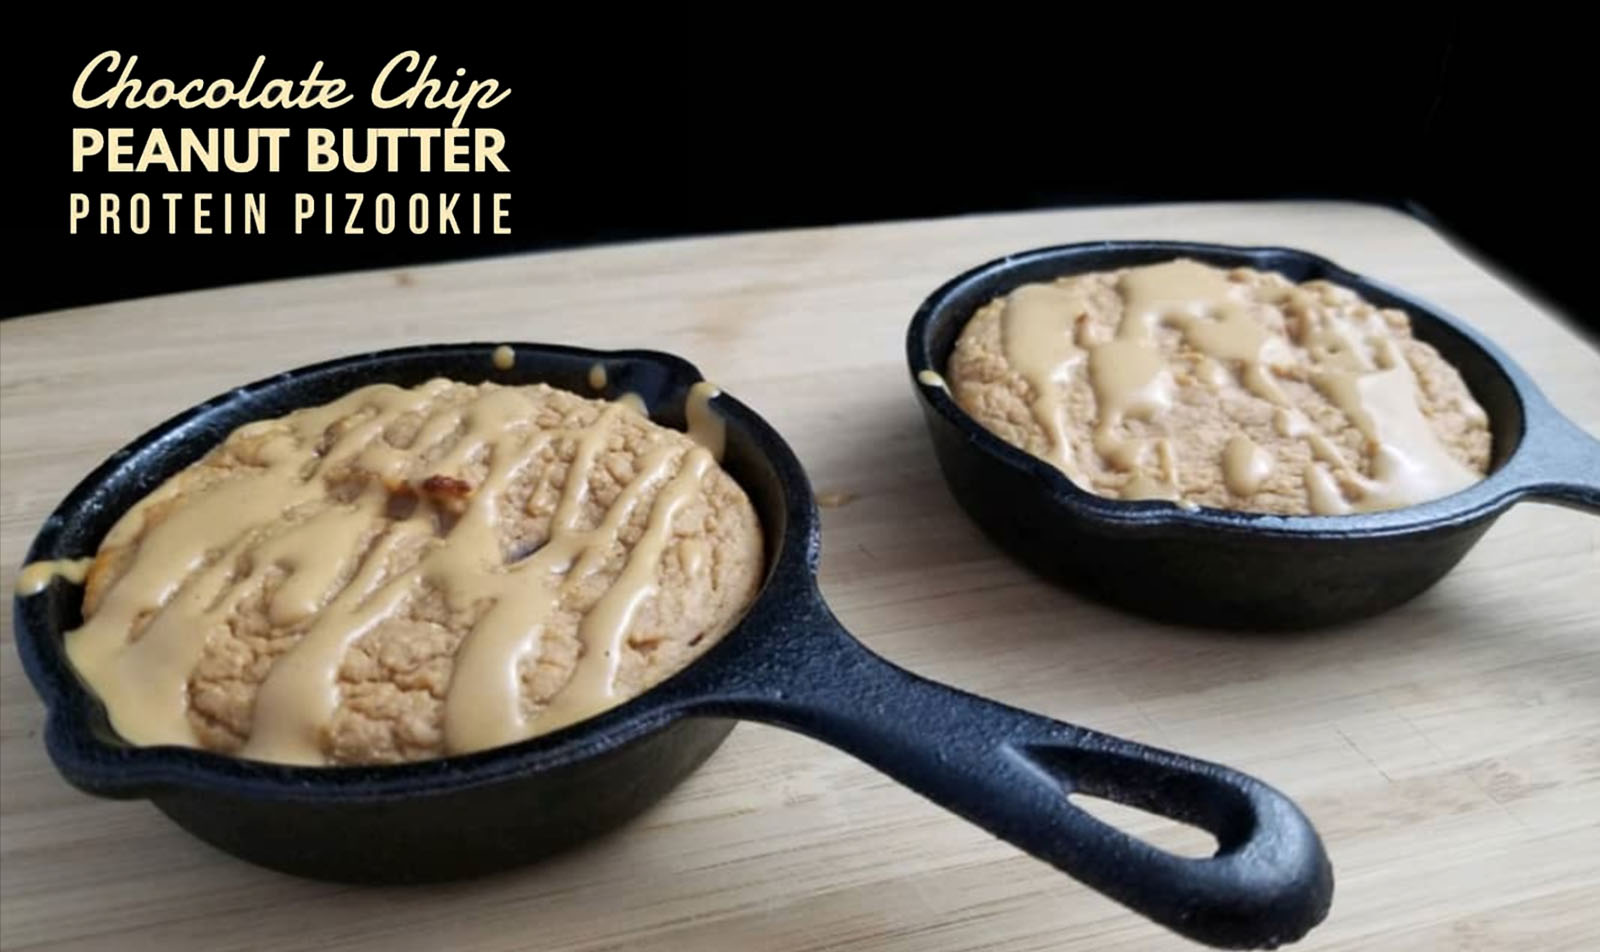 Chocolate Chip Peanut Butter Protein Pizookie